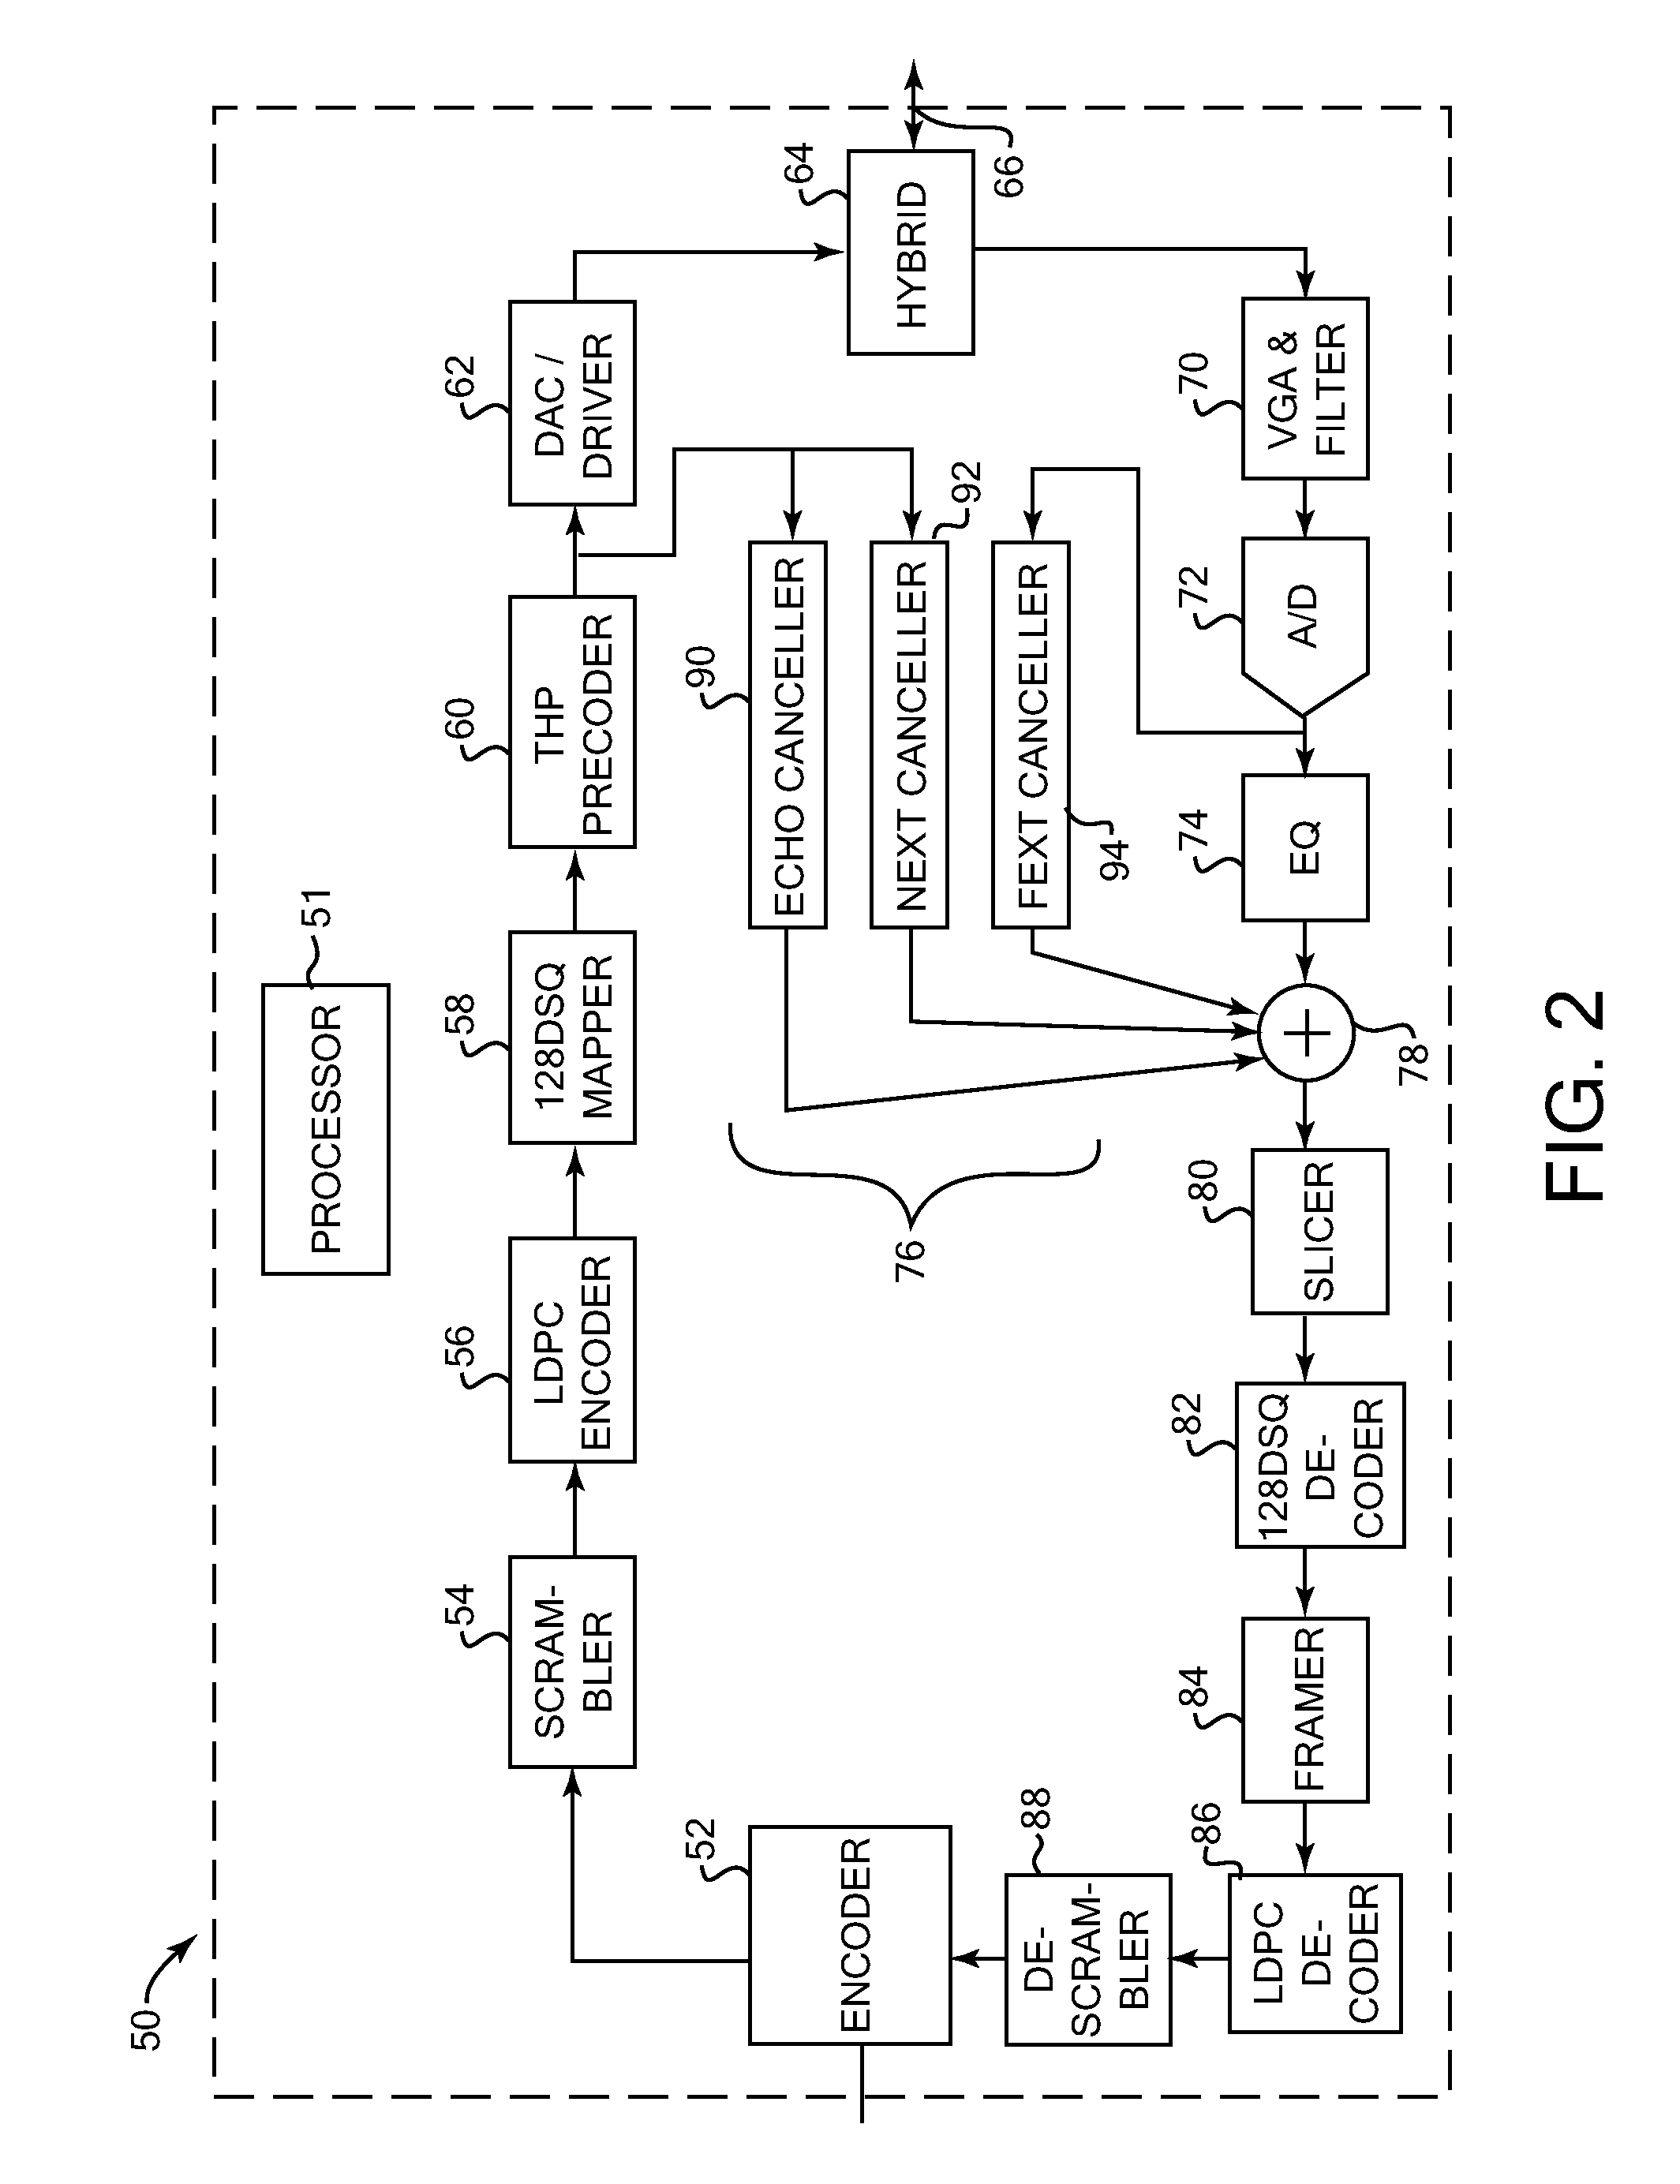 Rejecting RF interference in communication systems